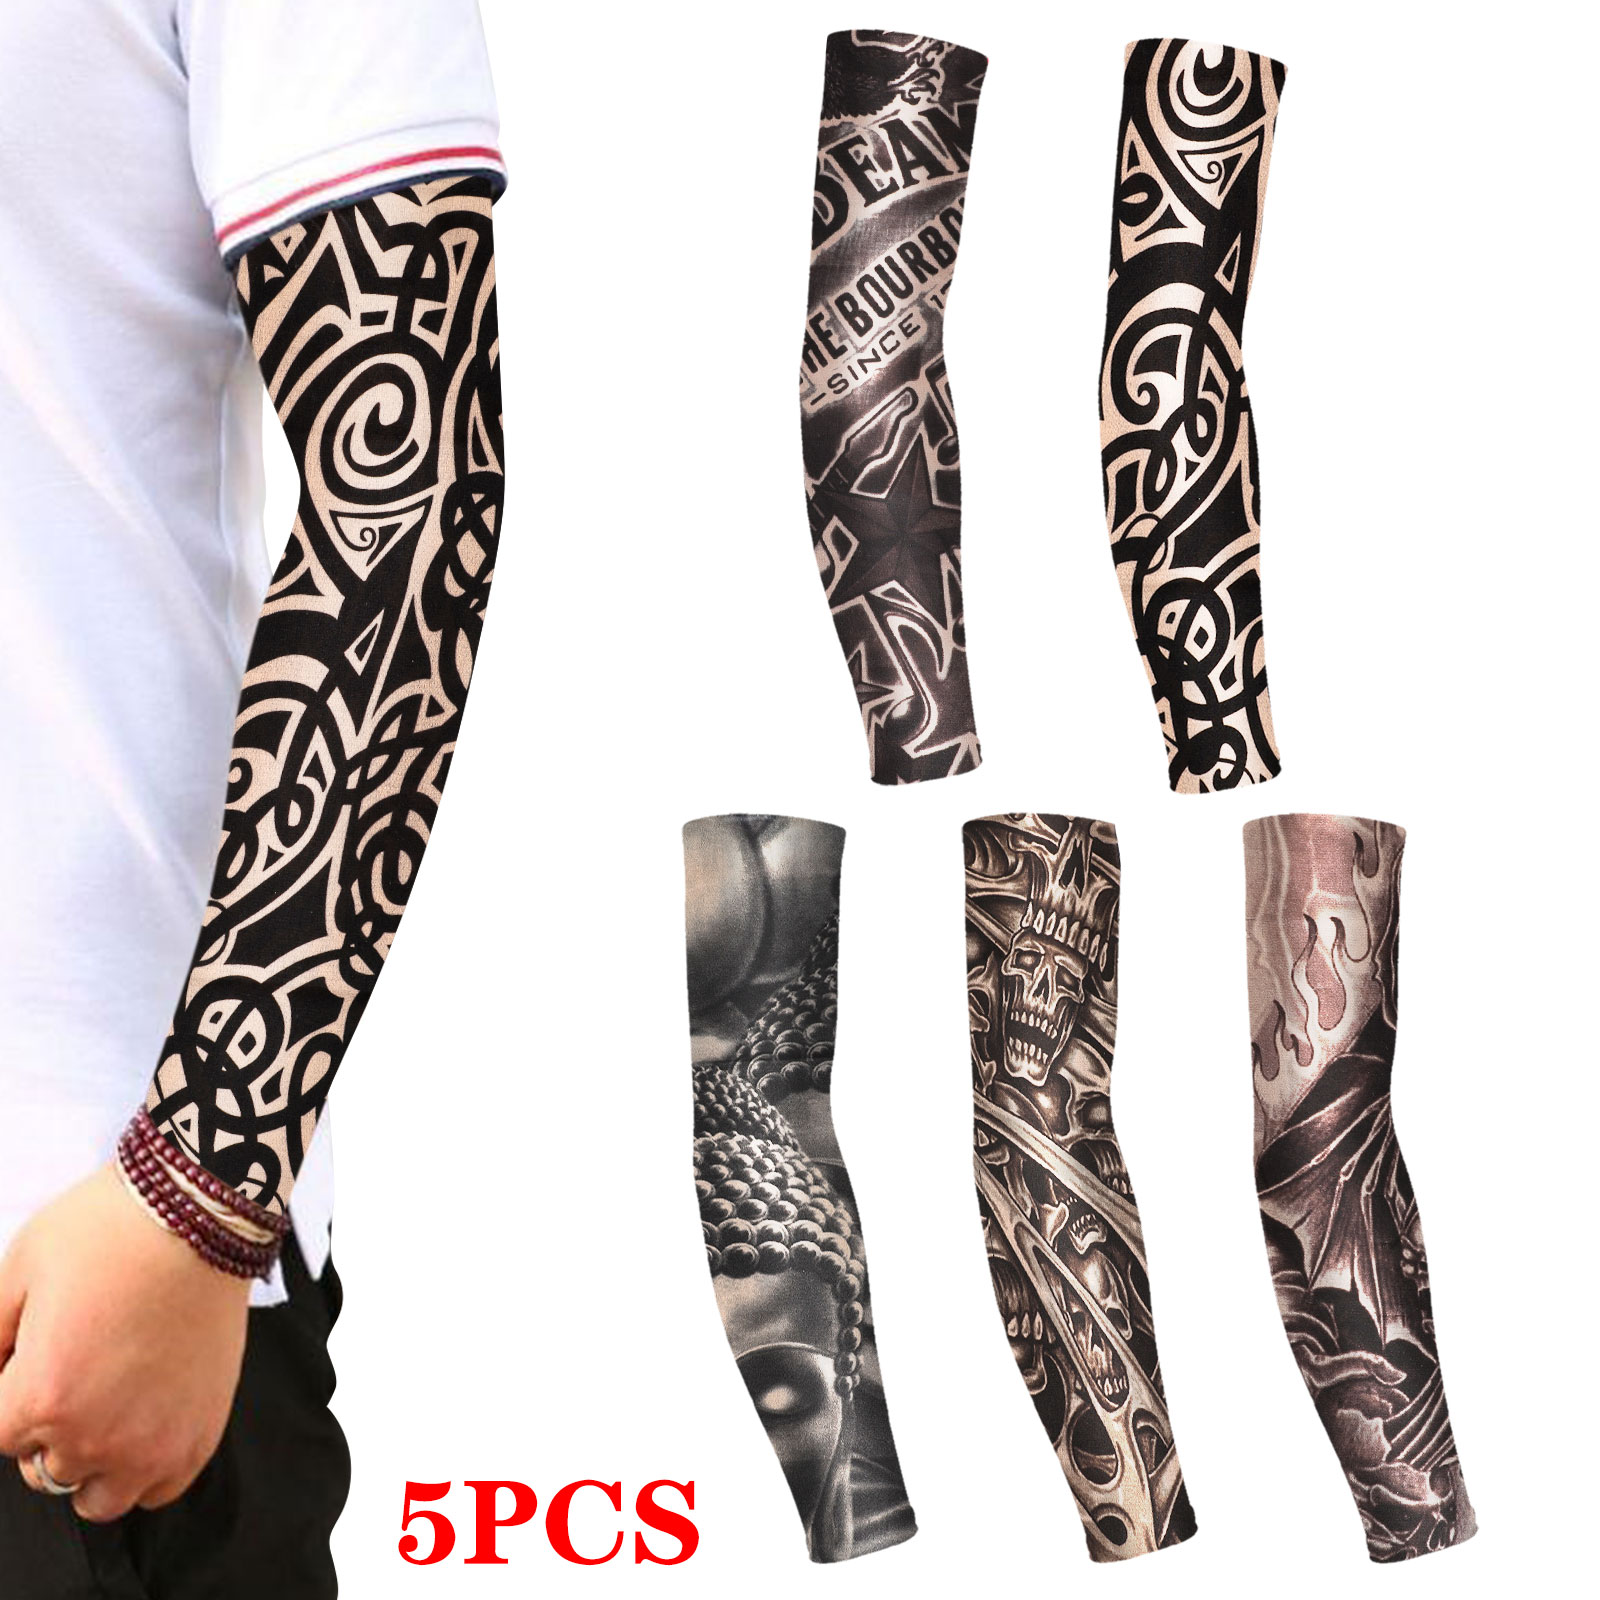 Details about   5 Pcs Arts Temporary Tattoo Sleeves Fake Slip On Arm Stockings Cooling Women Men 